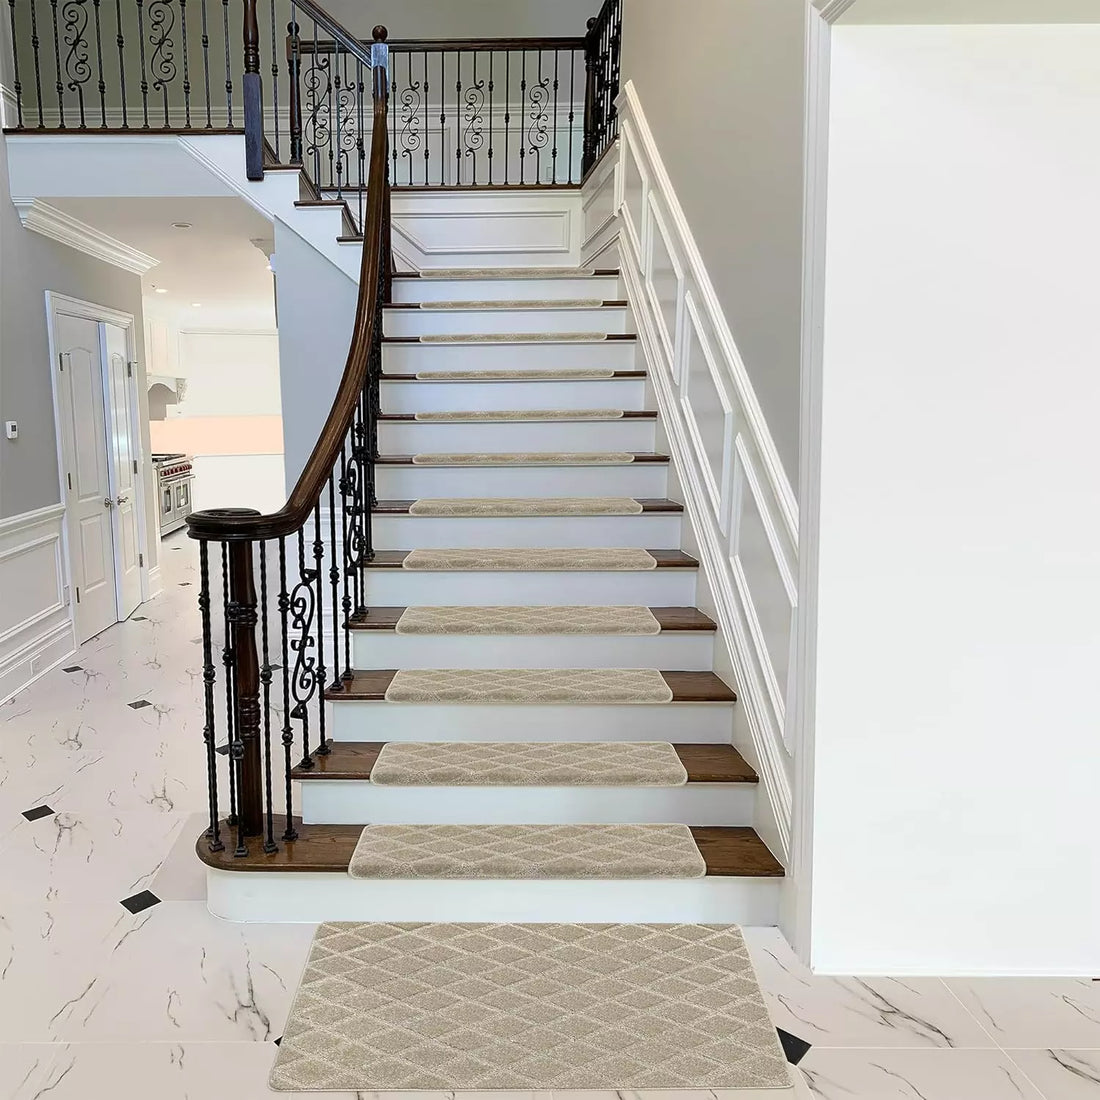 Bullnose Carpet Stair Treads Tape Free Non-Slip Indoor Stair Protectors Pet Friendly Stair Treads for Wooden Steps 9.5" x 30"x1.2" 14 Pieces,